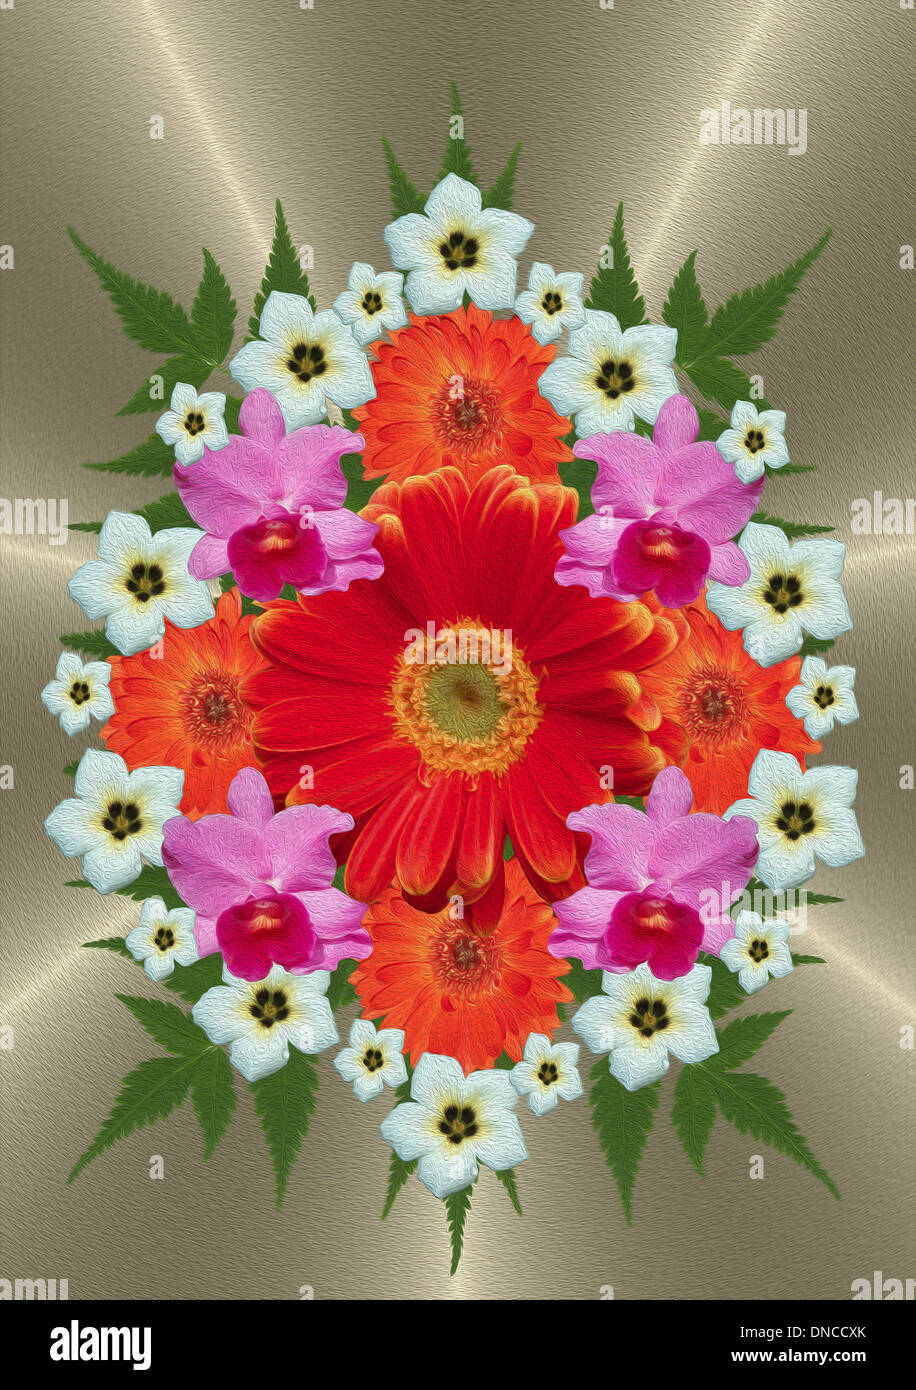 Unique digital floral arrangement with cluster of bright orange gerberas, surrounded by white turnera flowers, orchids on metallic silver background Stock Photo